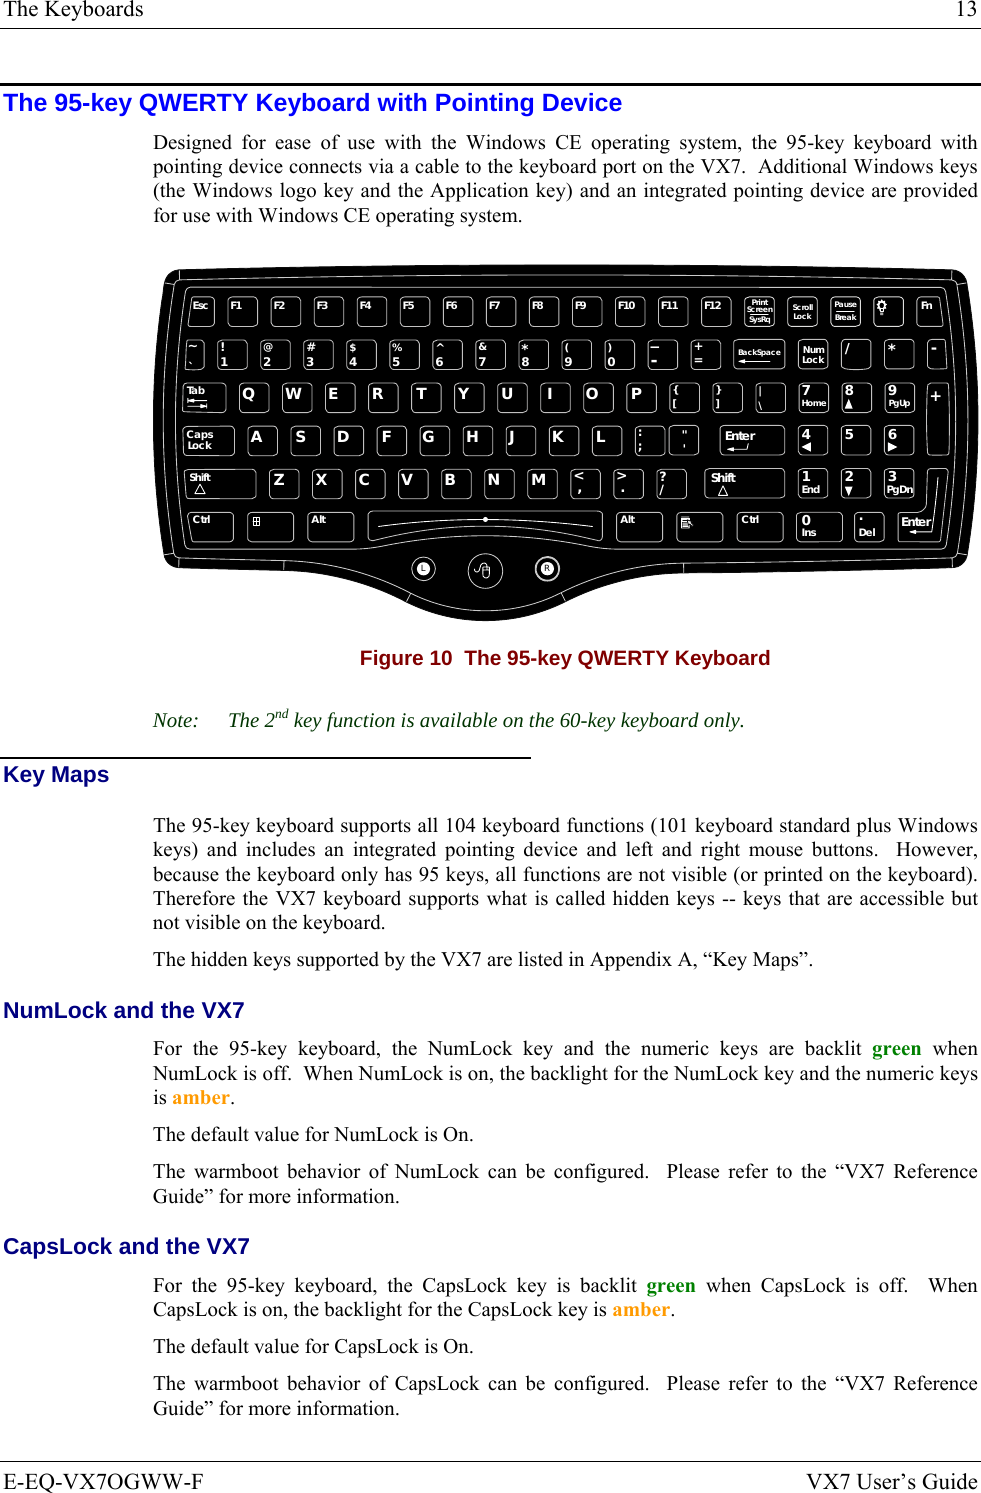 The Keyboards  13 E-EQ-VX7OGWW-F  VX7 User’s Guide The 95-key QWERTY Keyboard with Pointing Device Designed for ease of use with the Windows CE operating system, the 95-key keyboard with pointing device connects via a cable to the keyboard port on the VX7.  Additional Windows keys (the Windows logo key and the Application key) and an integrated pointing device are provided for use with Windows CE operating system. Esc F2 F3 F4 F5 F6 F7 F8 F9 F10 F11 F12PrintScreenSysRq ScrollLock PauseBreakFn`1234567890-=BackSpaceNumLock/*-TabQWE R T Y U I OP[]\{}|7894561203Home PgUpCapsASDFGHJKL;&apos;:&quot;EnterCtrl AltXCVBNM,./&lt;&gt;?ShiftAlt Ctrl InsEnd PgDn+~!@#$%^&amp;*()_+LockShiftZLREnter.DelF1 Figure 10  The 95-key QWERTY Keyboard Note: The 2nd key function is available on the 60-key keyboard only. Key Maps The 95-key keyboard supports all 104 keyboard functions (101 keyboard standard plus Windows keys) and includes an integrated pointing device and left and right mouse buttons.  However, because the keyboard only has 95 keys, all functions are not visible (or printed on the keyboard). Therefore the VX7 keyboard supports what is called hidden keys -- keys that are accessible but not visible on the keyboard. The hidden keys supported by the VX7 are listed in Appendix A, “Key Maps”. NumLock and the VX7 For the 95-key keyboard, the NumLock key and the numeric keys are backlit green when NumLock is off.  When NumLock is on, the backlight for the NumLock key and the numeric keys is amber. The default value for NumLock is On. The warmboot behavior of NumLock can be configured.  Please refer to the “VX7 Reference Guide” for more information. CapsLock and the VX7 For the 95-key keyboard, the CapsLock key is backlit green when CapsLock is off.  When CapsLock is on, the backlight for the CapsLock key is amber. The default value for CapsLock is On. The warmboot behavior of CapsLock can be configured.  Please refer to the “VX7 Reference Guide” for more information. 